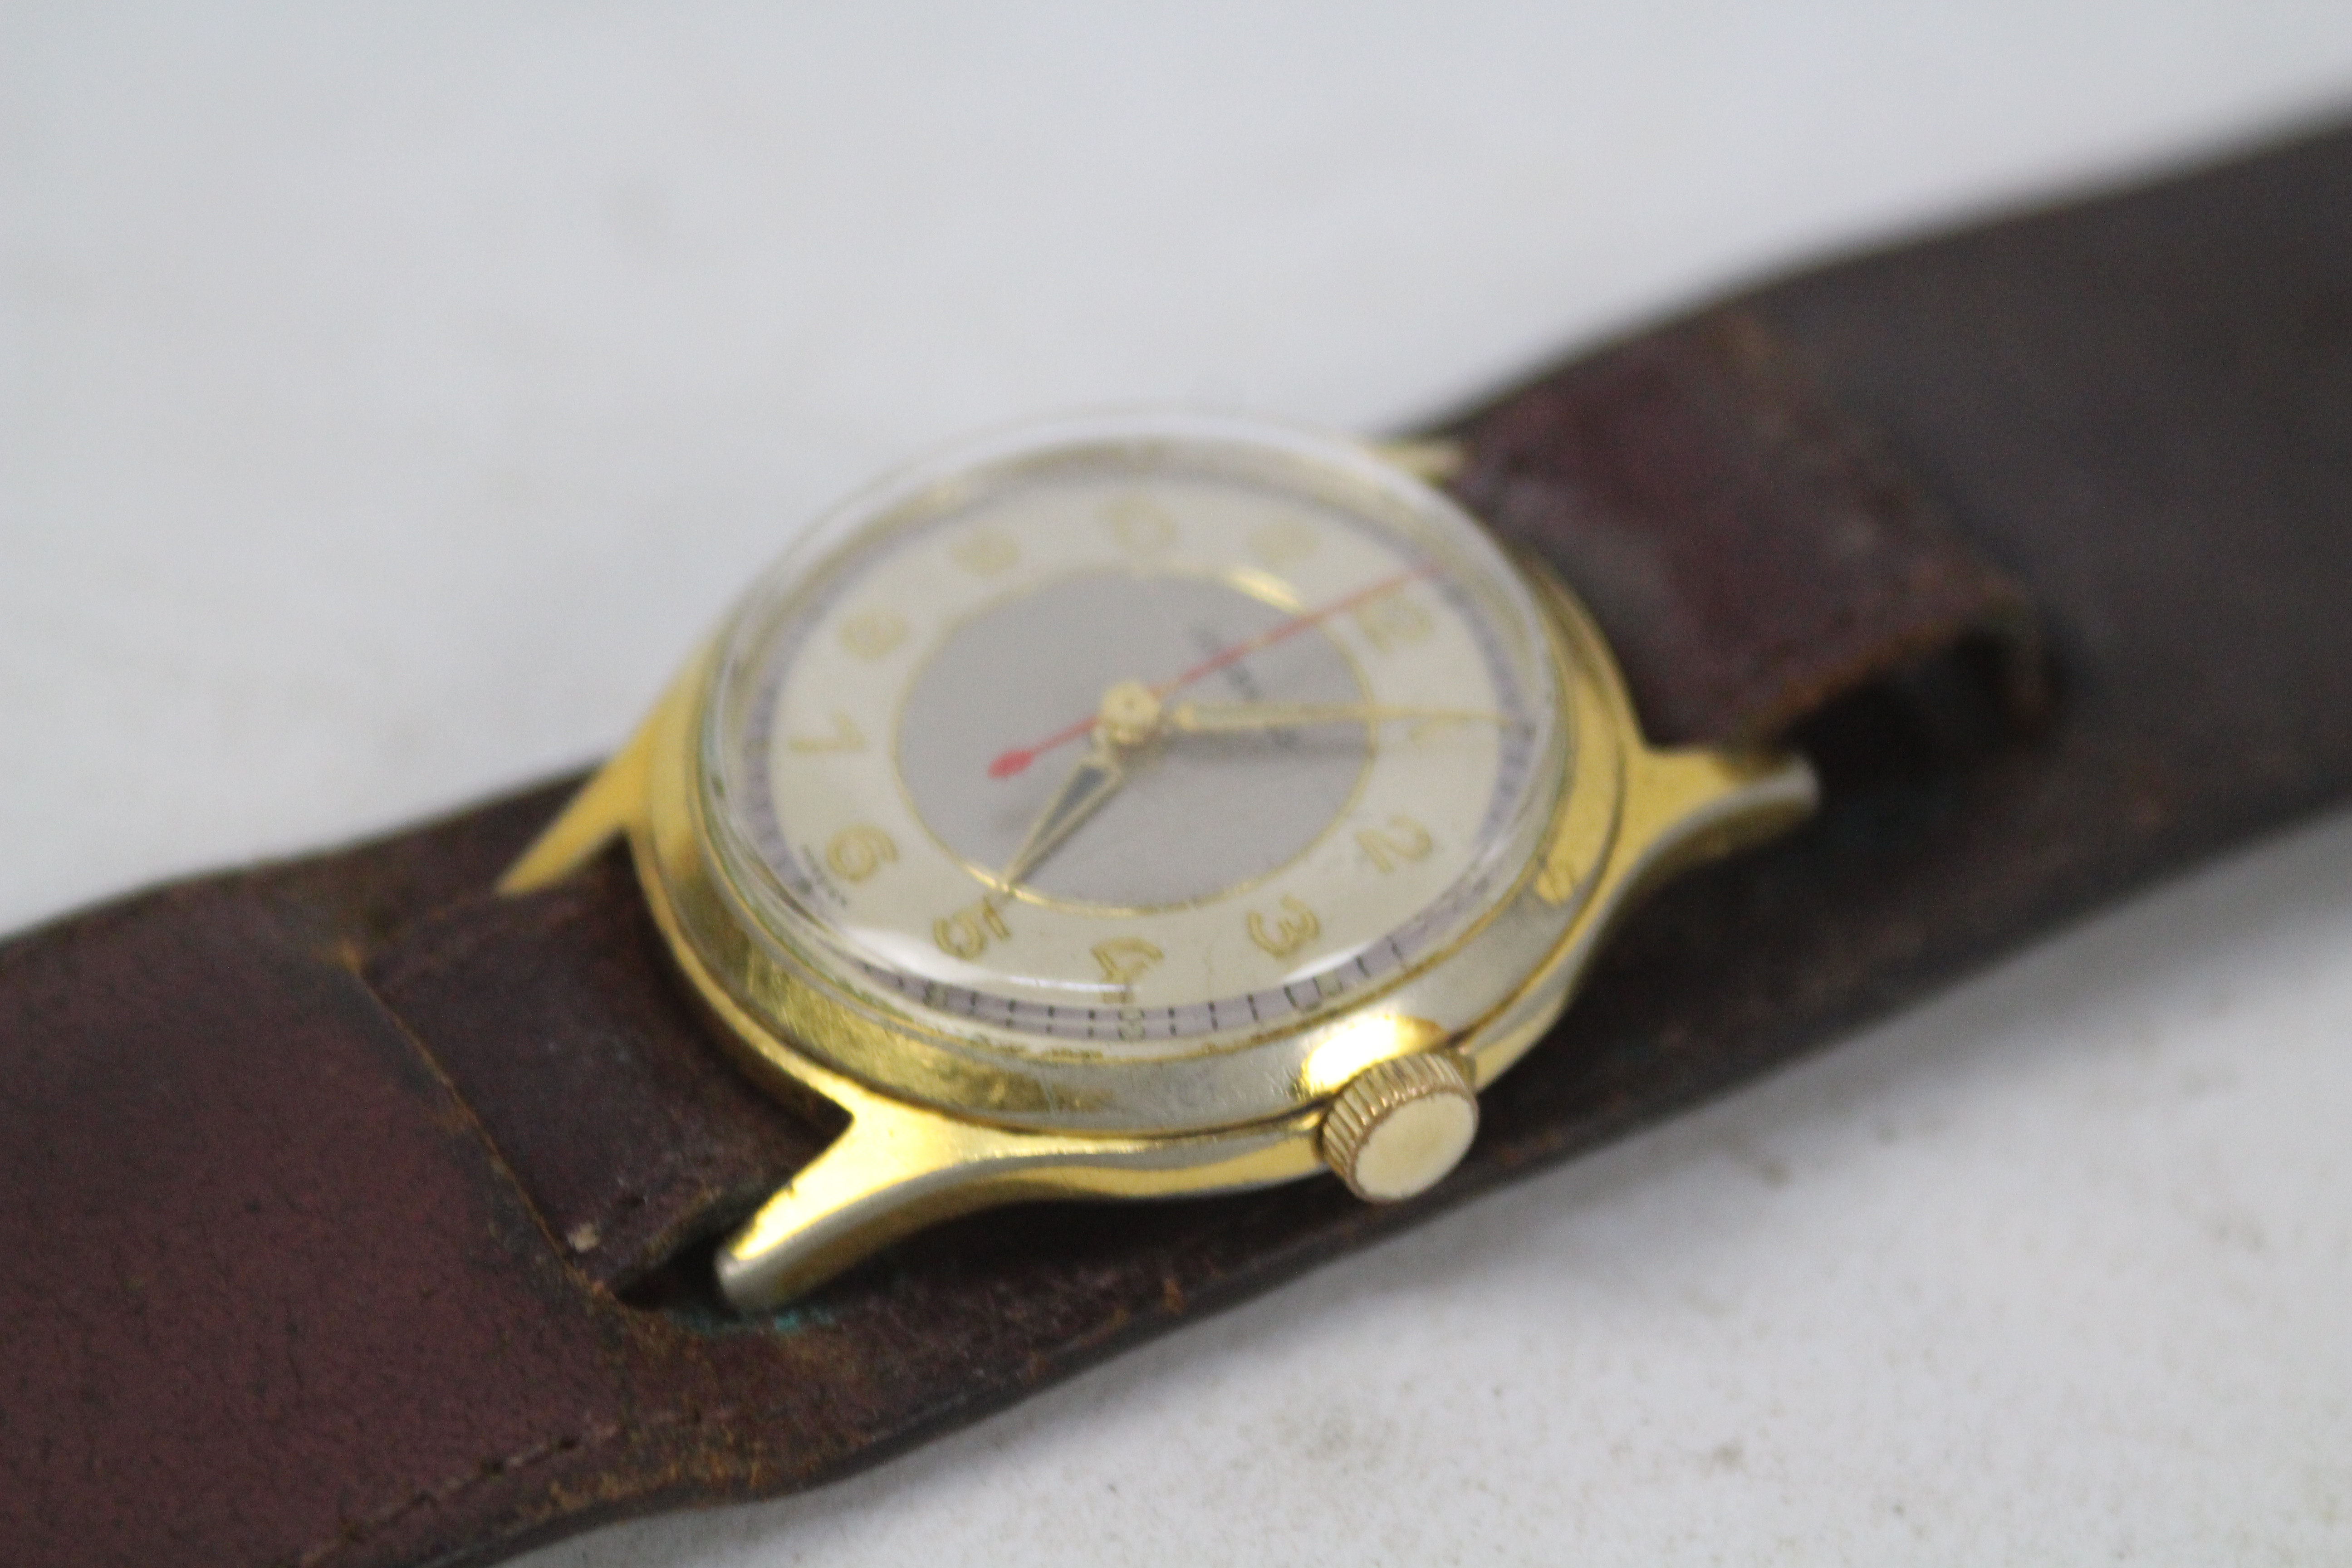 A vintage, gold plated, manual wind, Junghans wrist watch, 3. - Image 4 of 4